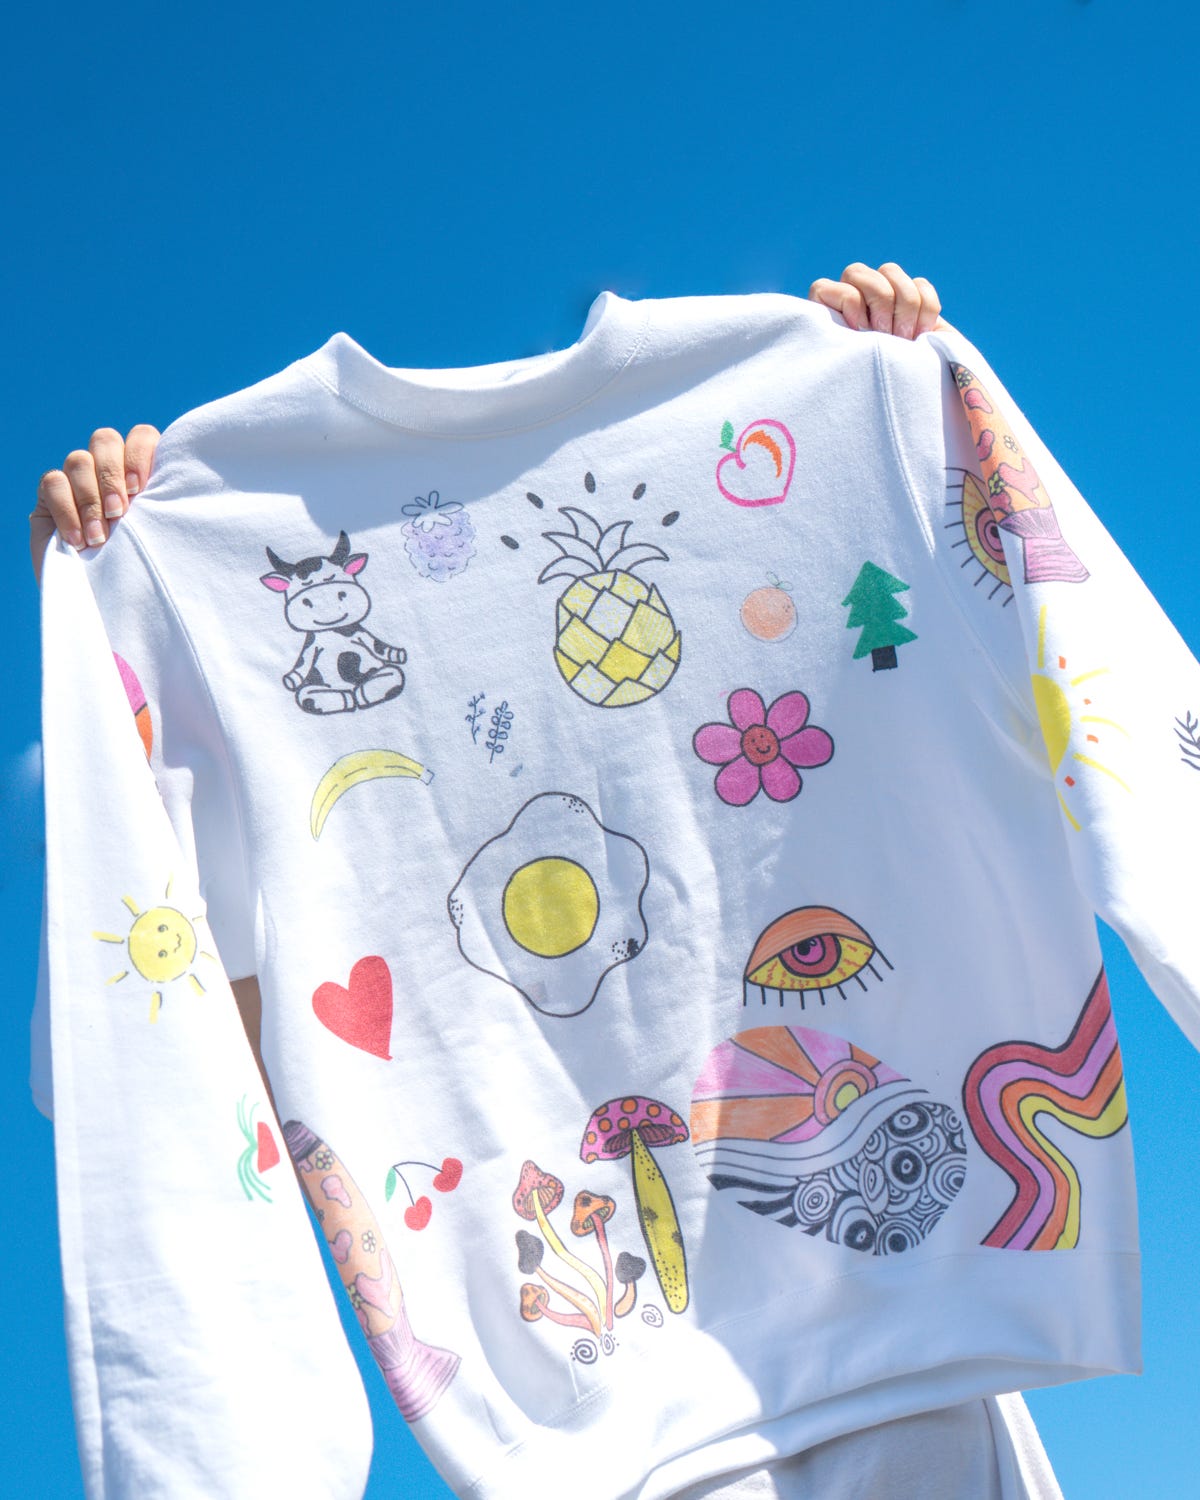 Two hands holding up a white crewneck sweatshirt with doodles on the front.